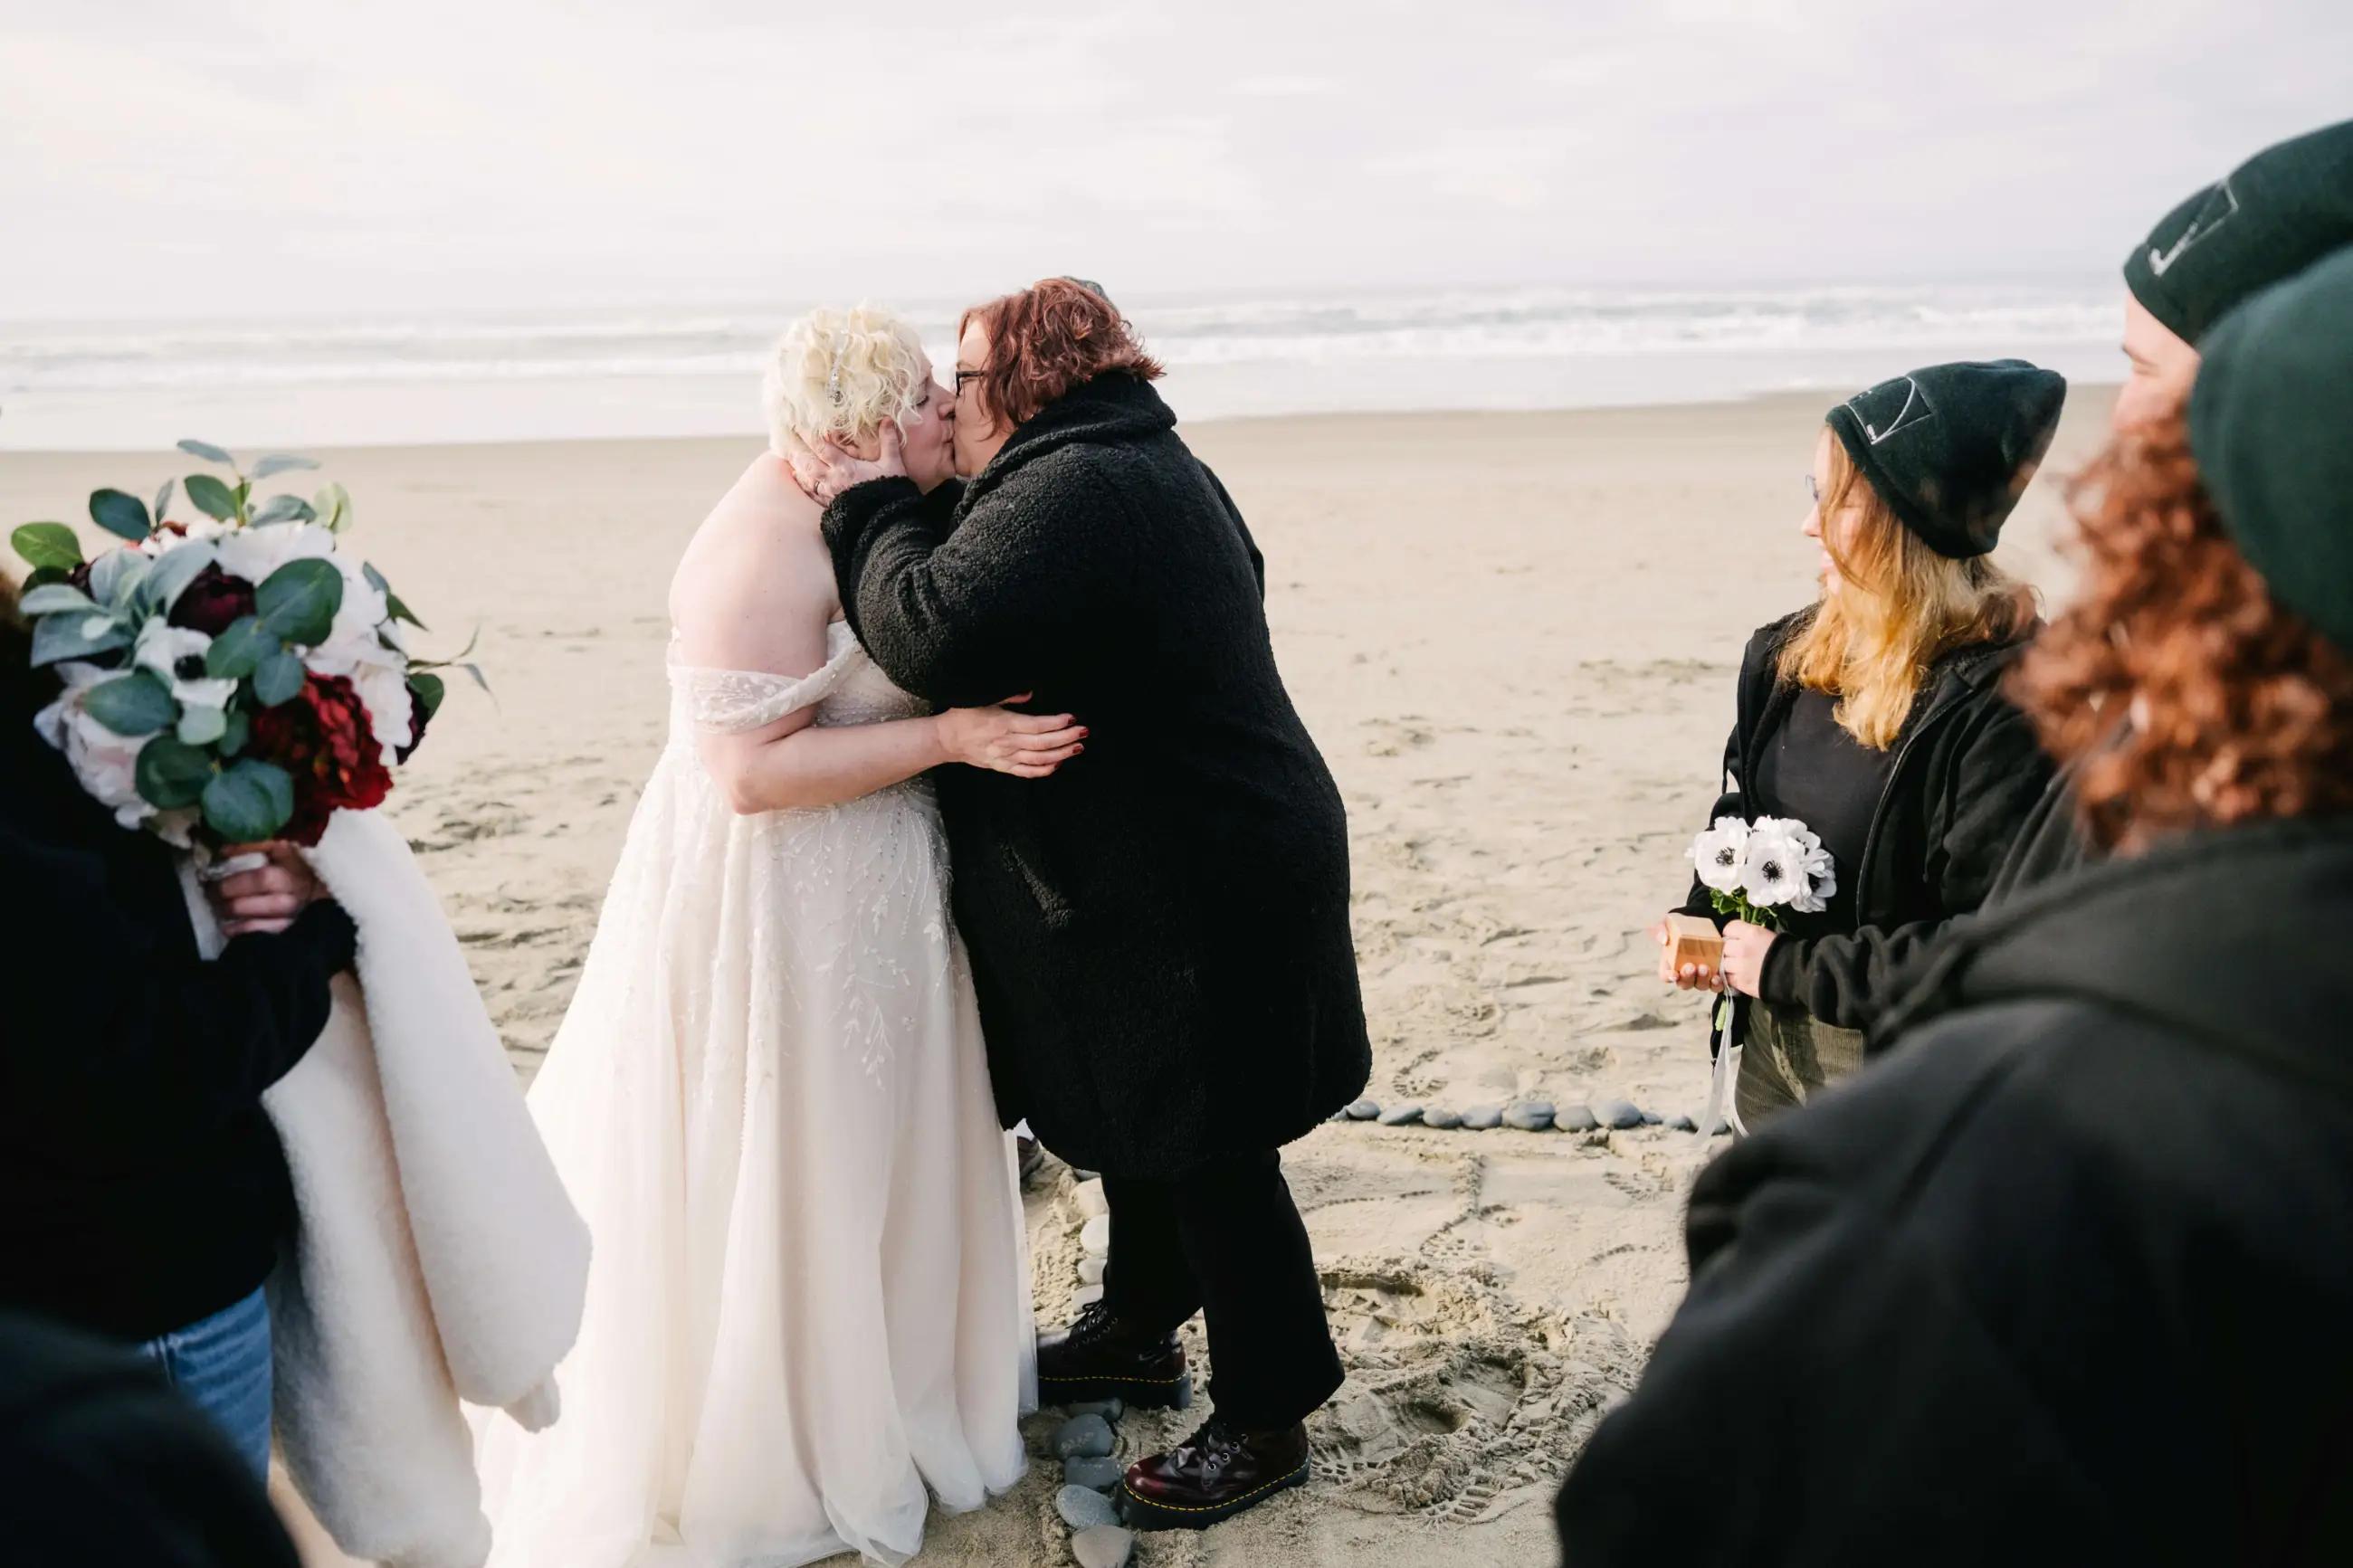 Two brides kissing on wedding day